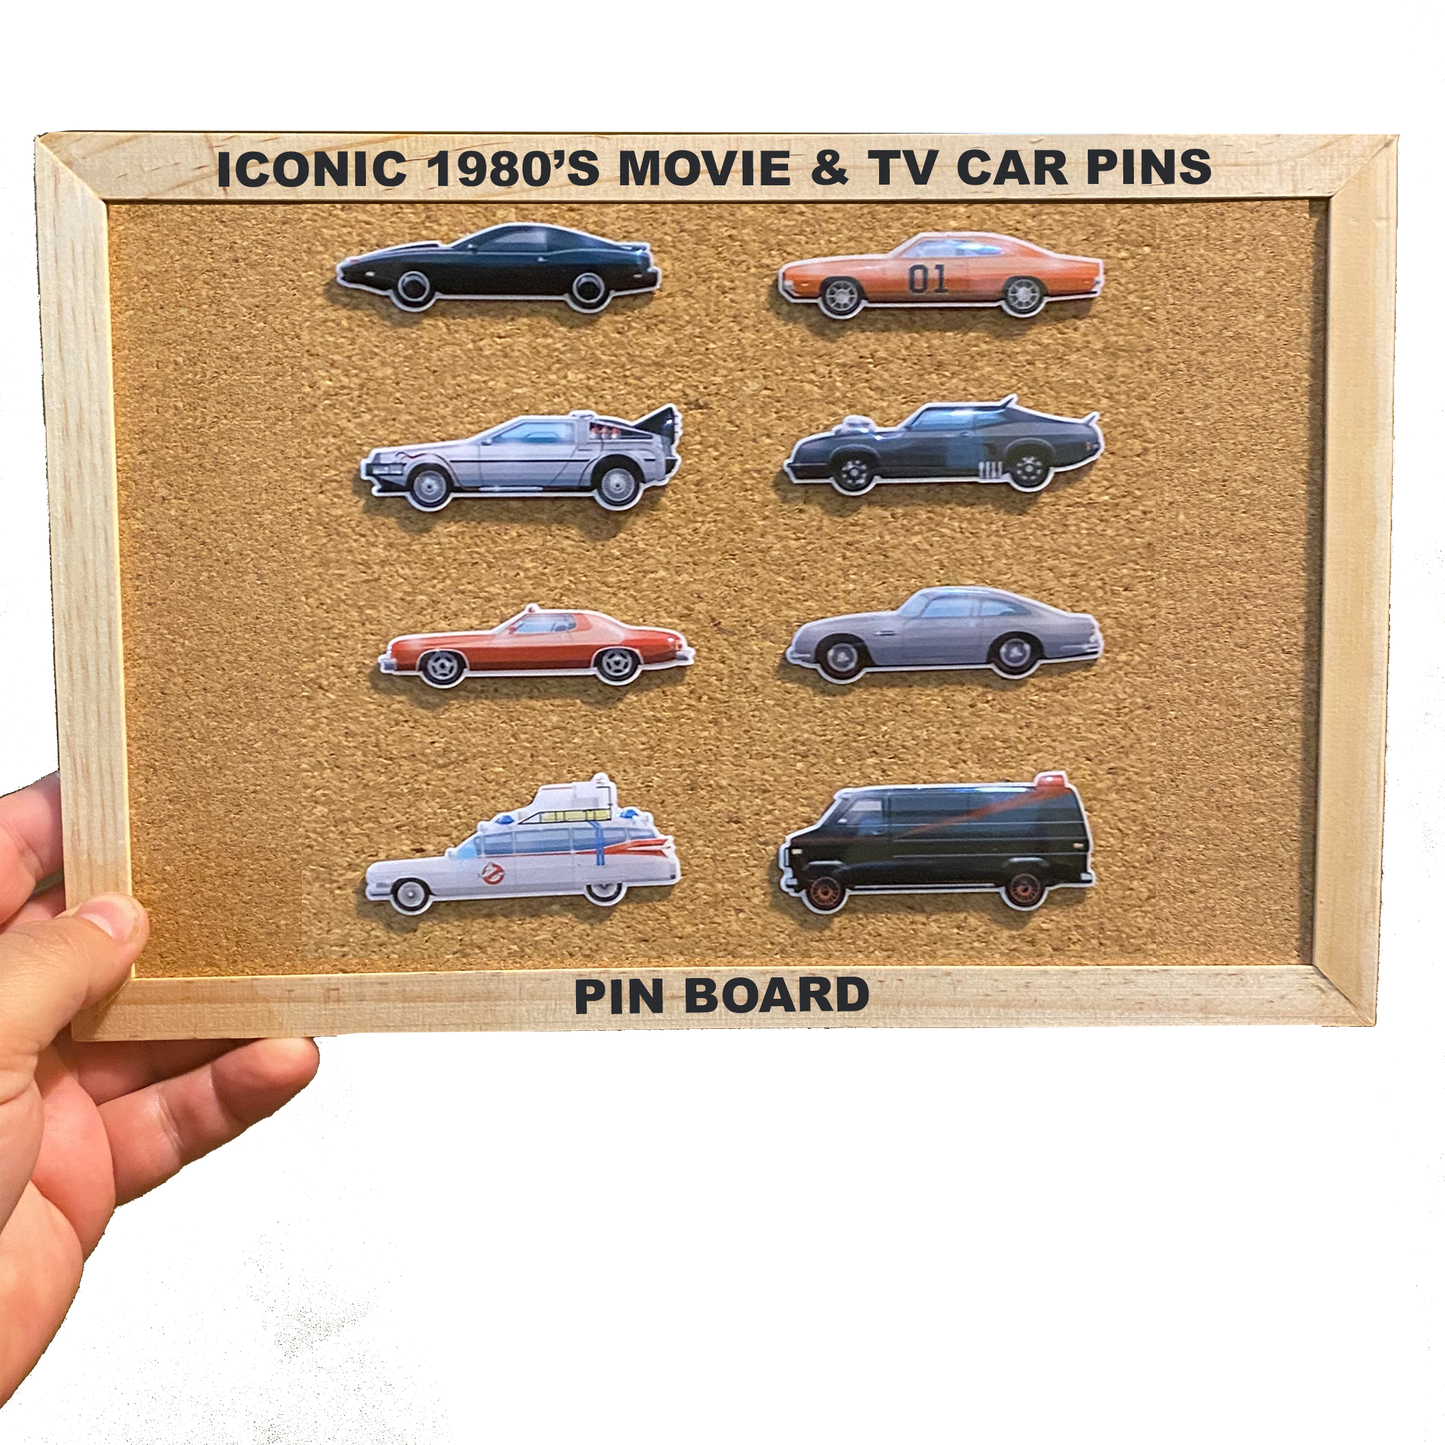 DL11-07 Legendary Iconic Movie TV Cars 1980 Edition 8 pins 80's set collection Knight Rider Back to the Future Mad Max Starsky and Hutch A-Team Ghost Busters James Bond Dukes of Hazzard